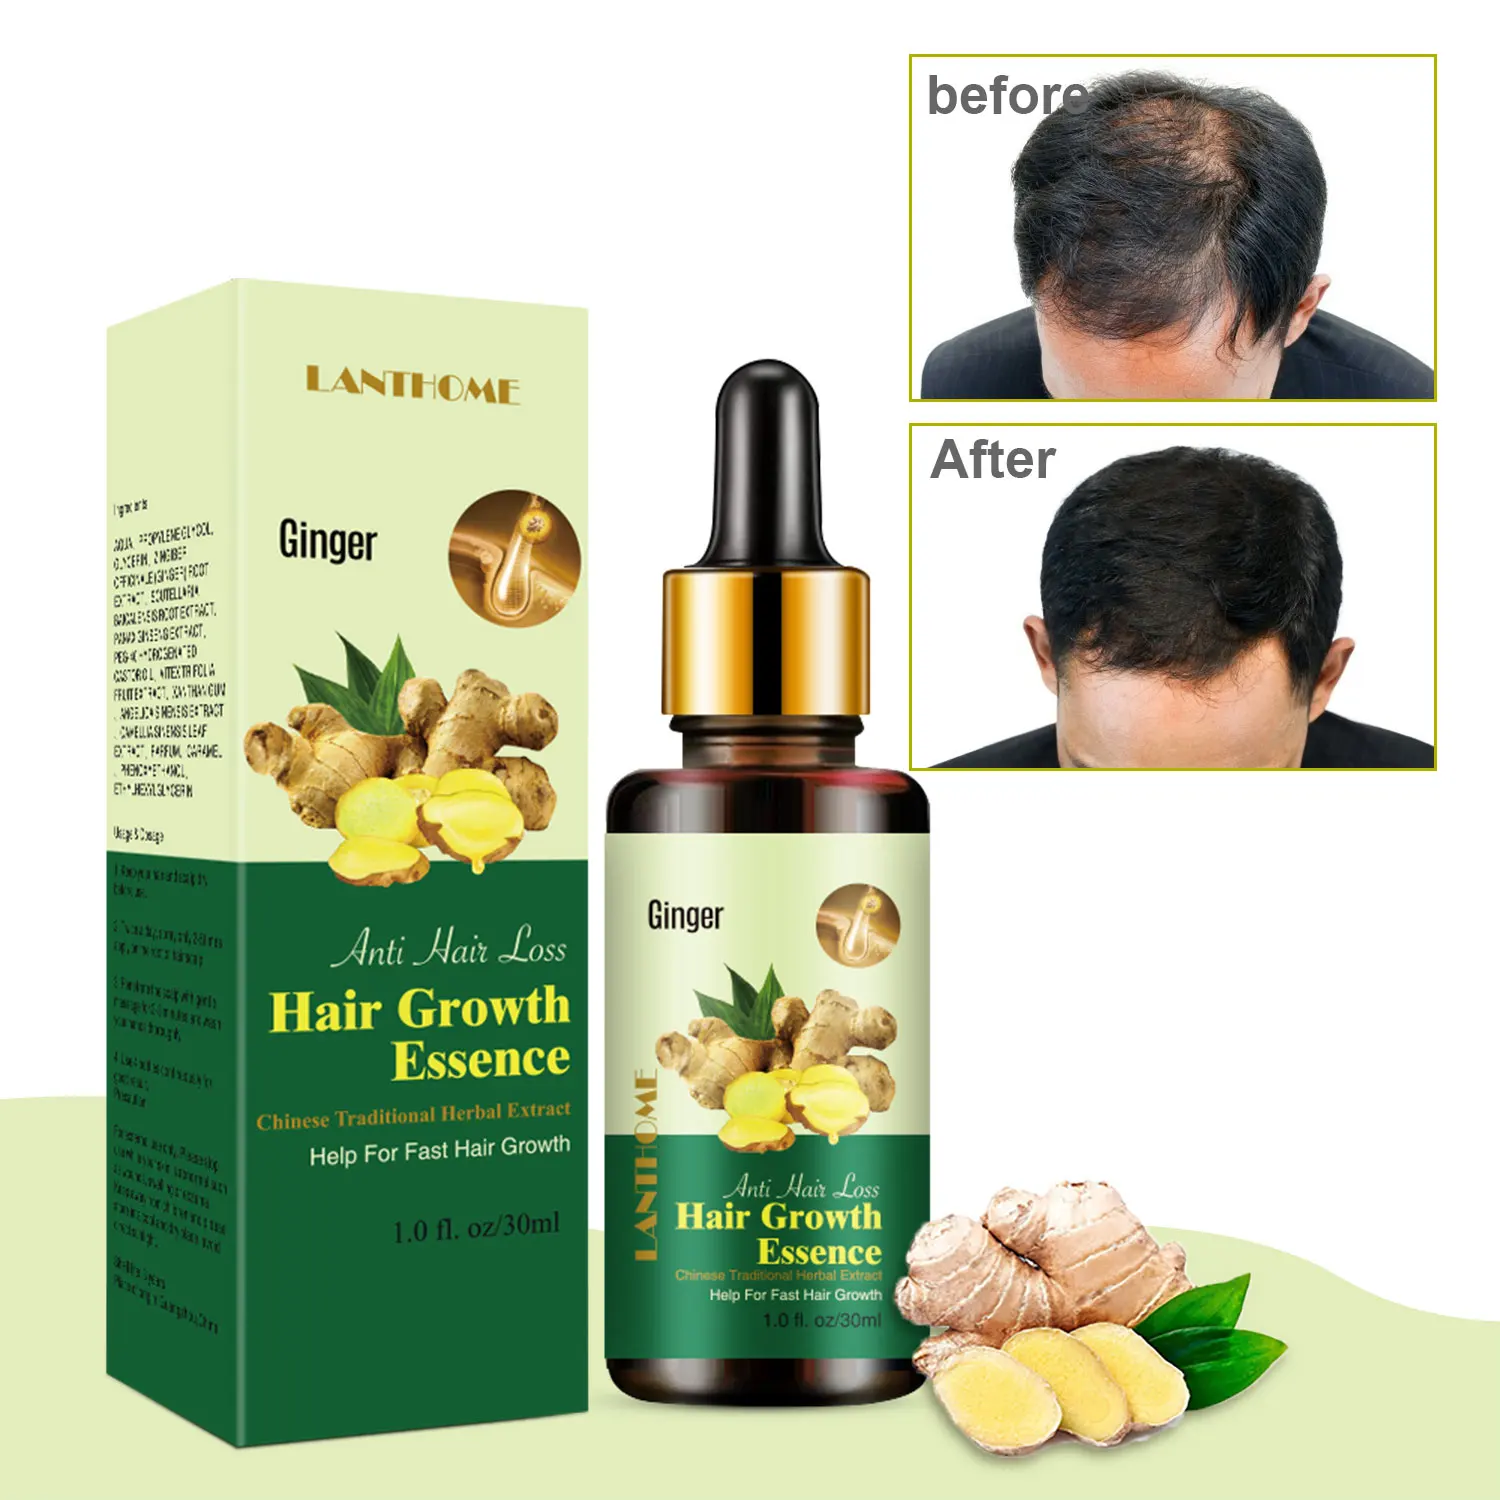 

30ml Hair Growth Essential Oils Ginger Fast Growing Hair Serum Products For Men Women Prevent Hair Loss Oils Scalp Beauty Health